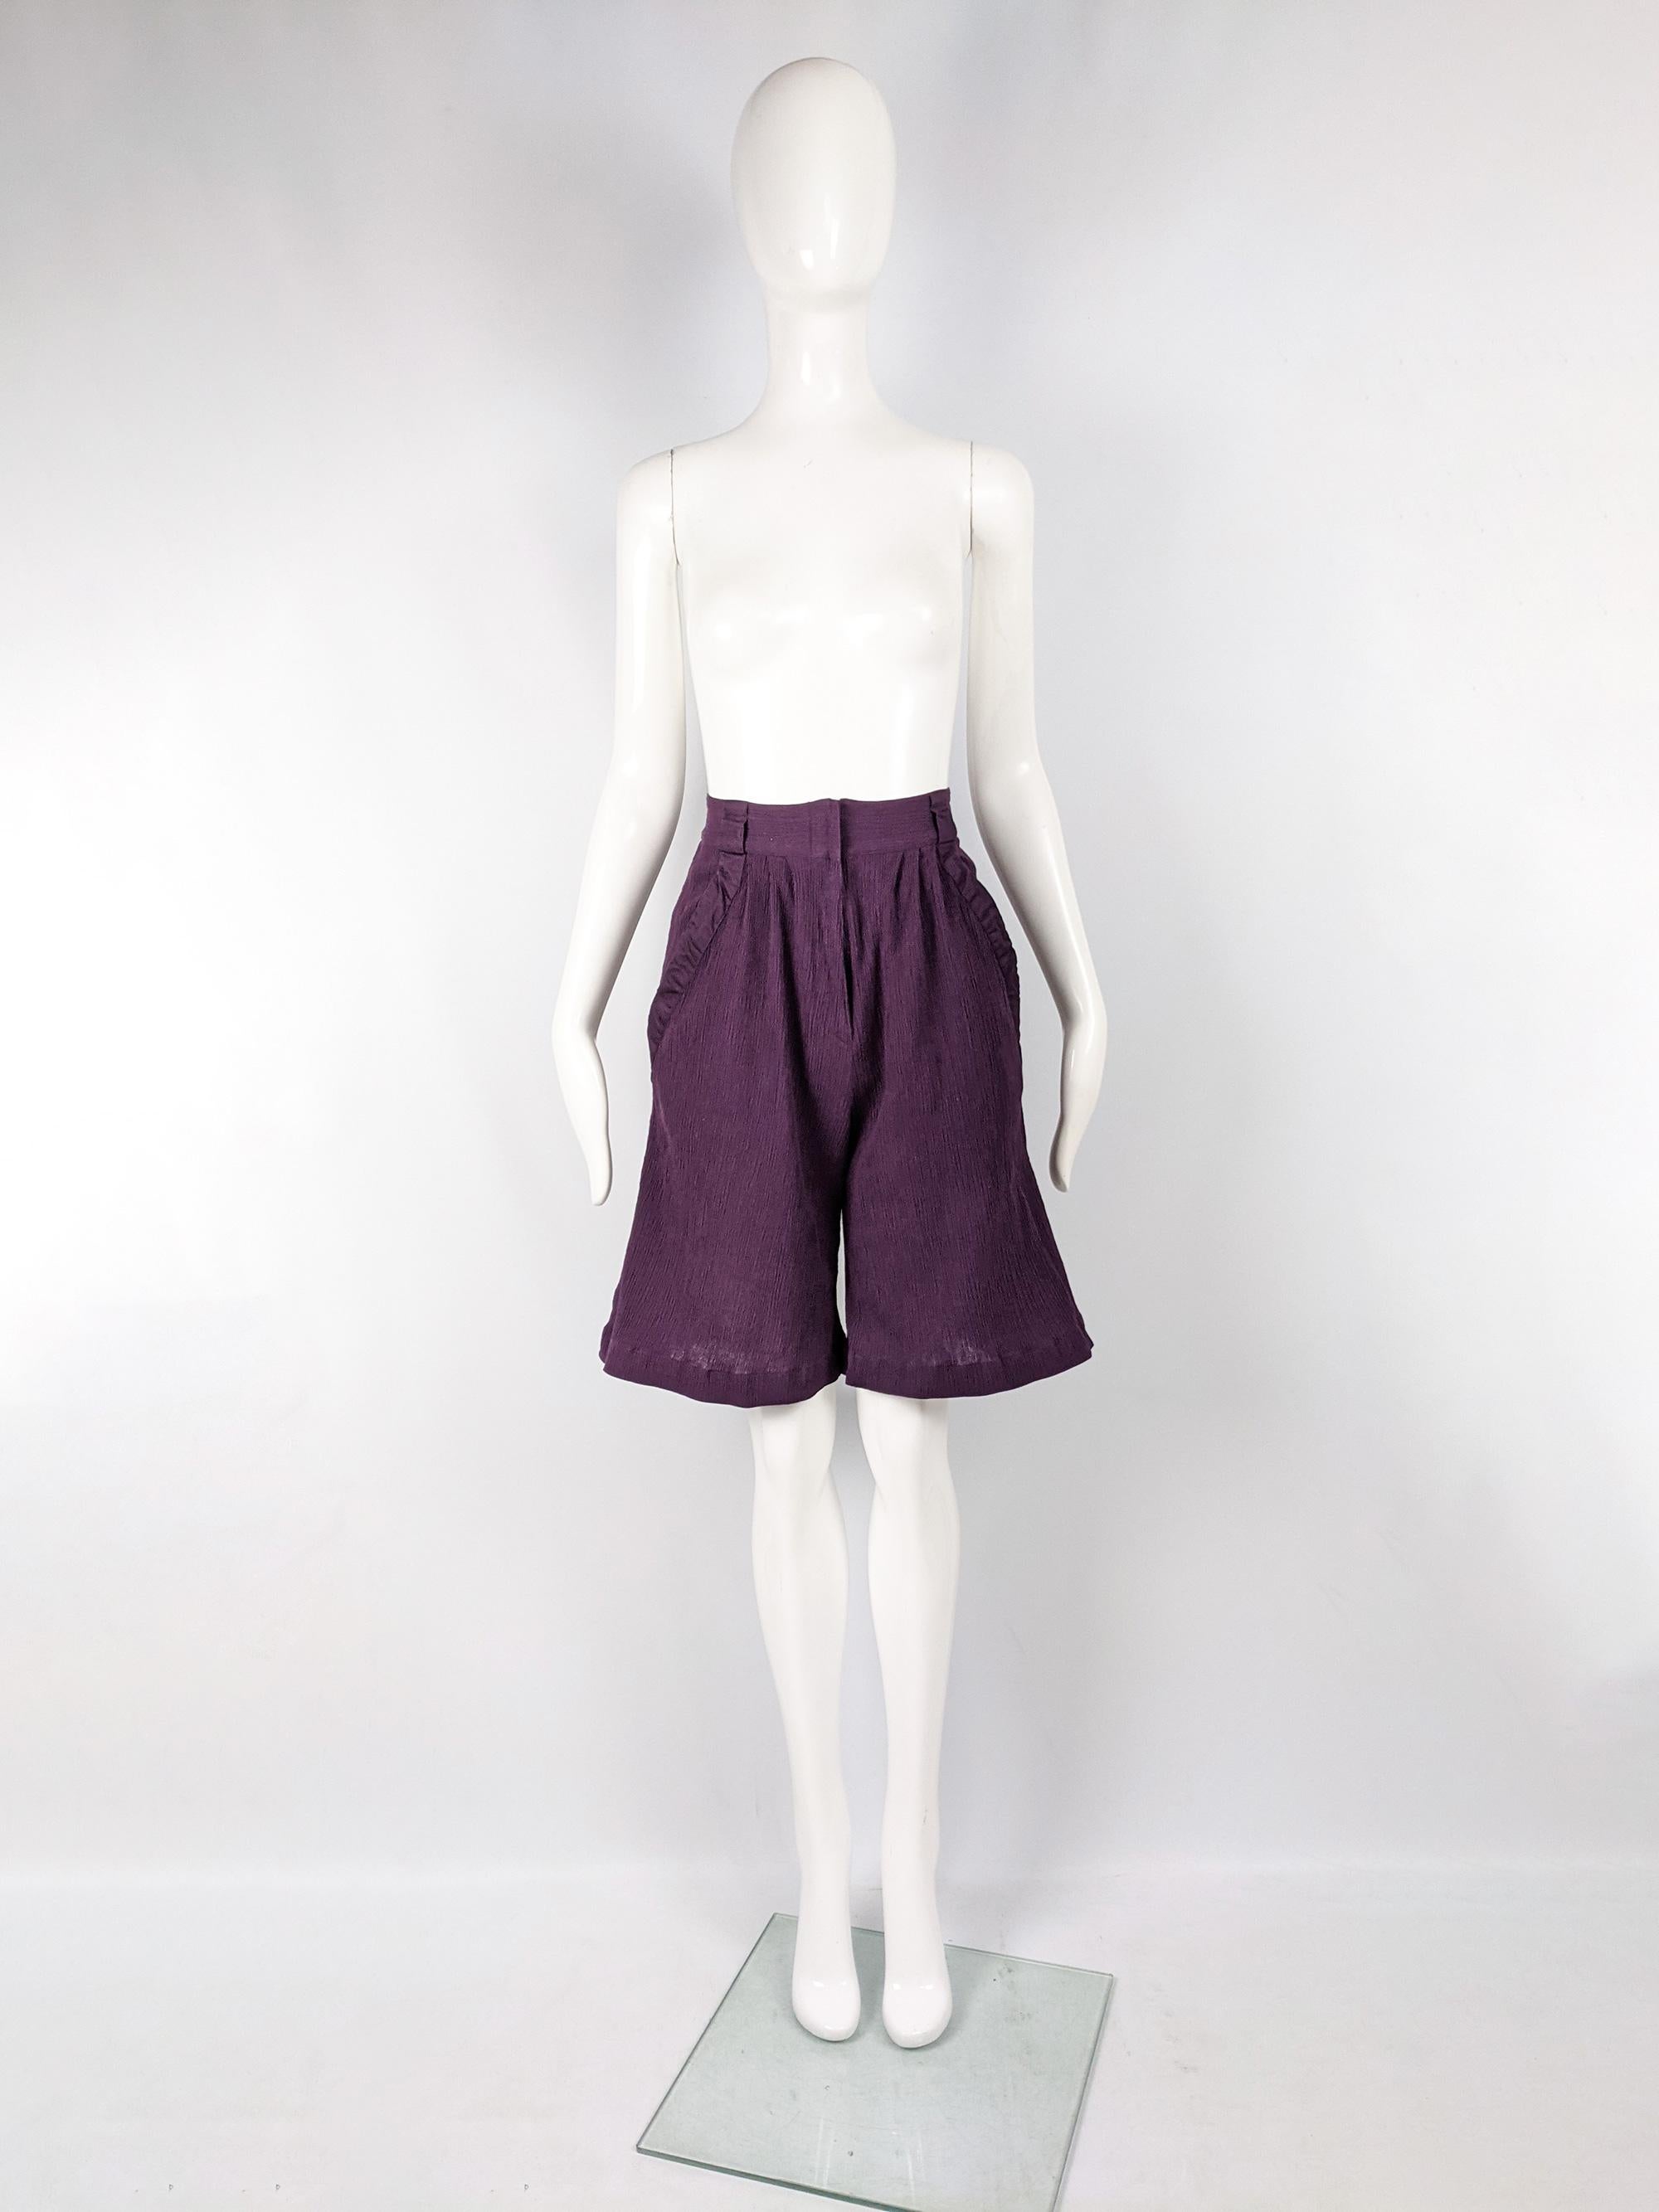 An amazing and rare pair of Gianni Versace vintage womens shorts from the early 80s. In an aubergine / dark purple pleated fabric with a wide leg that flares out to created a fluted shape and a high waist.

Size:  Marked vintage IT 42 but fits more